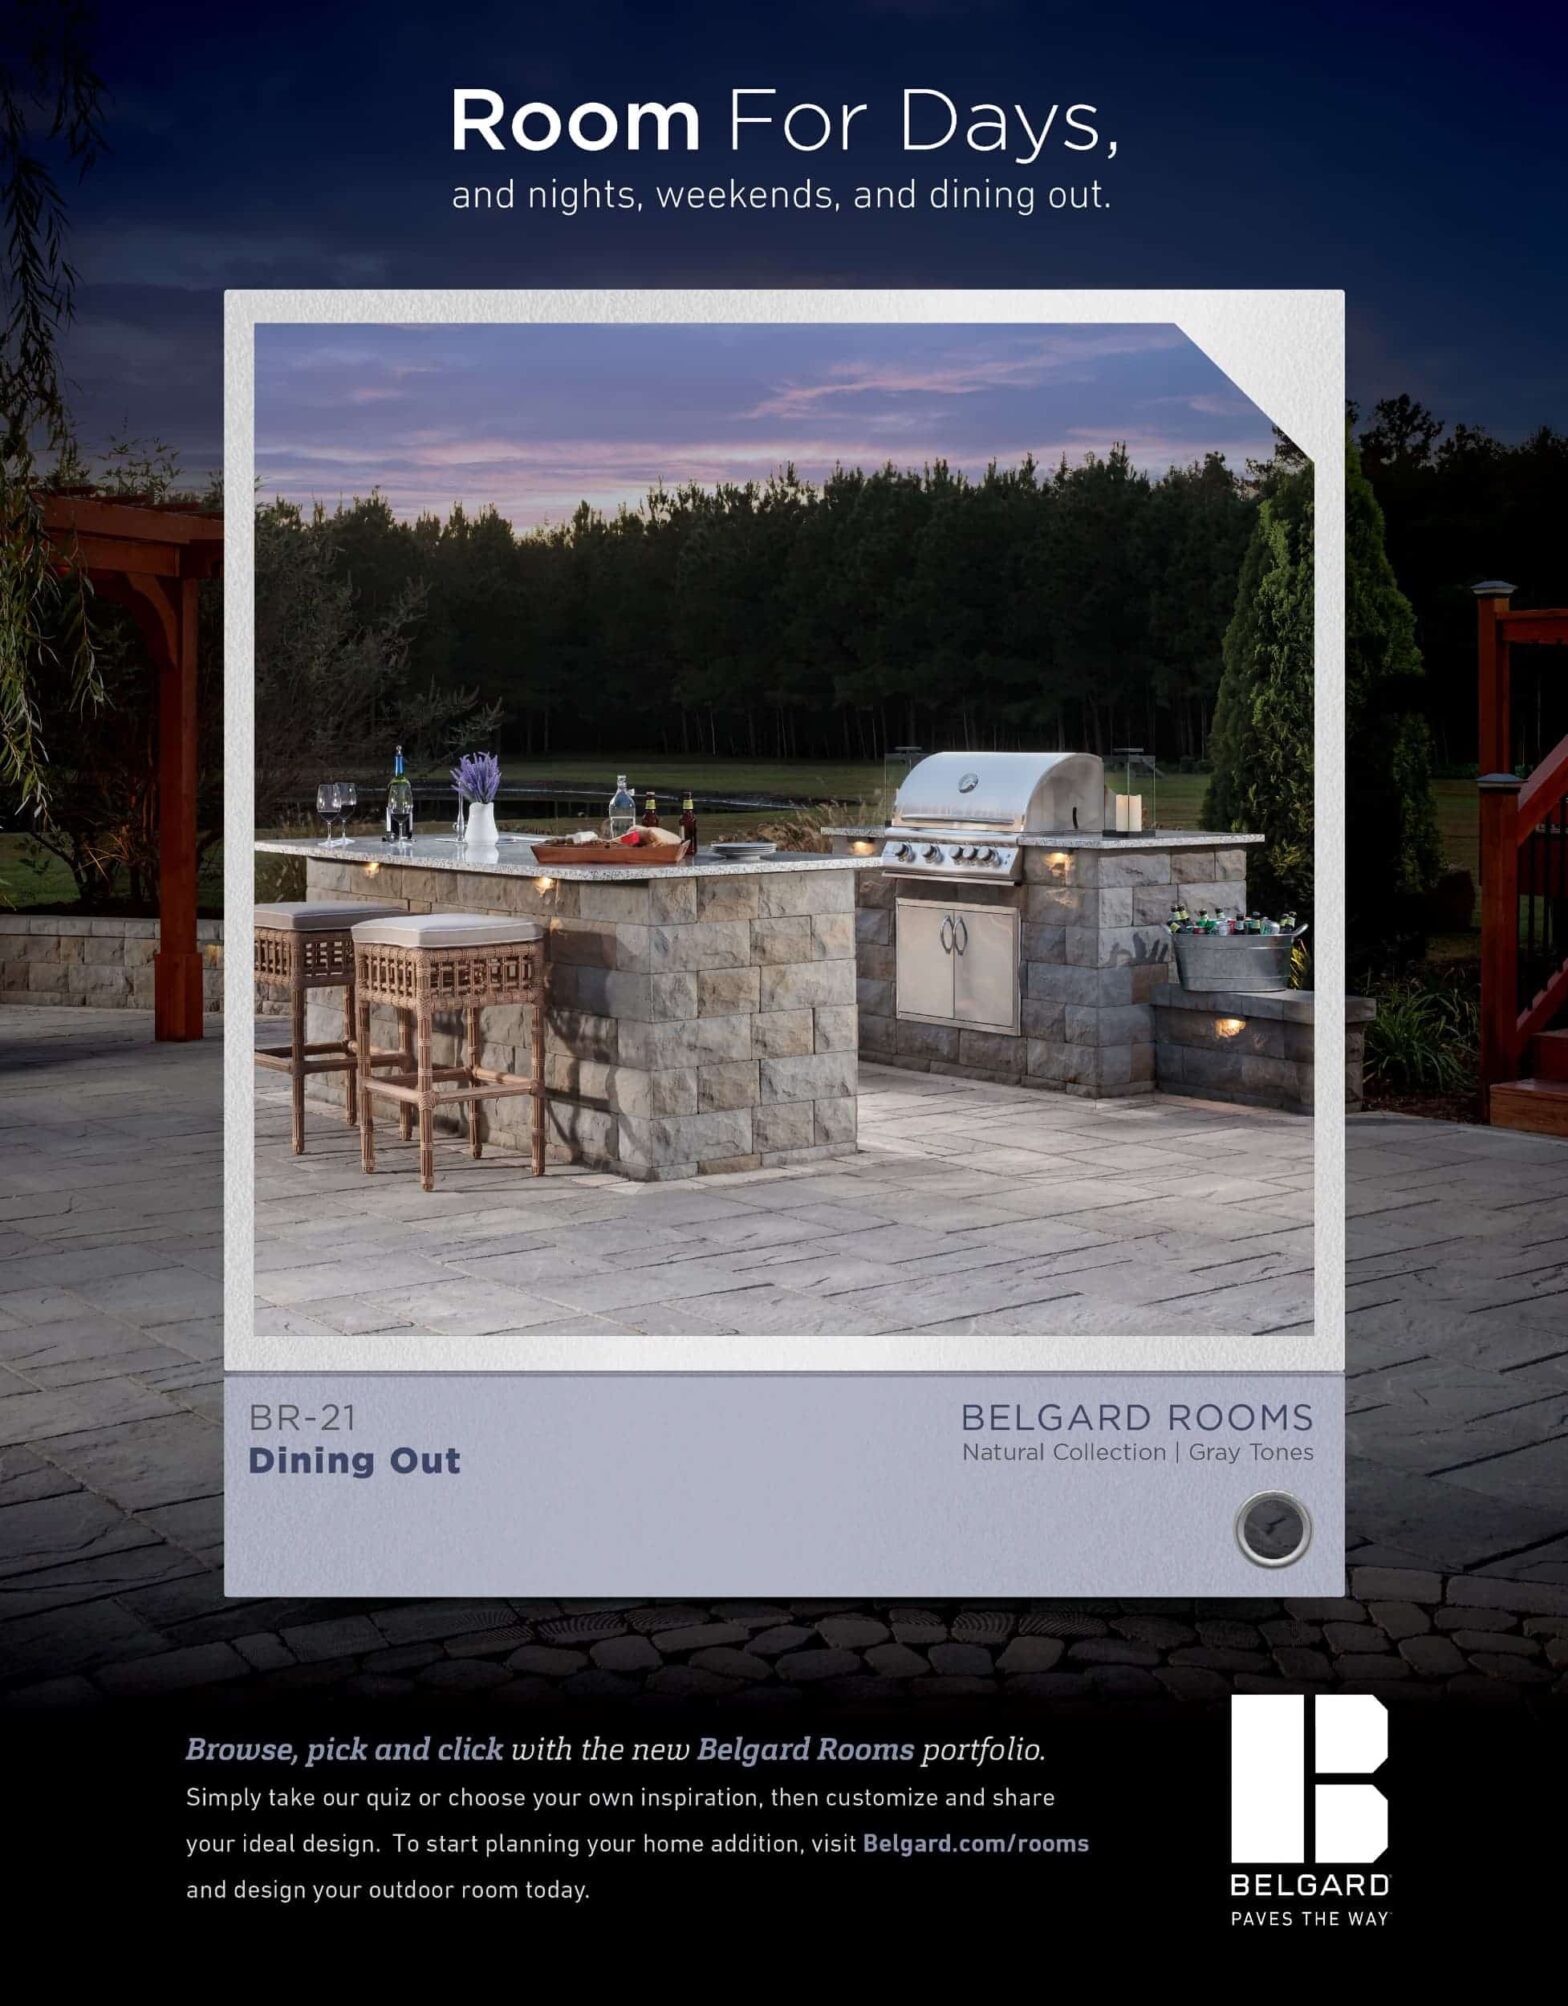 Another print ad for the Belgard Rooms campaign